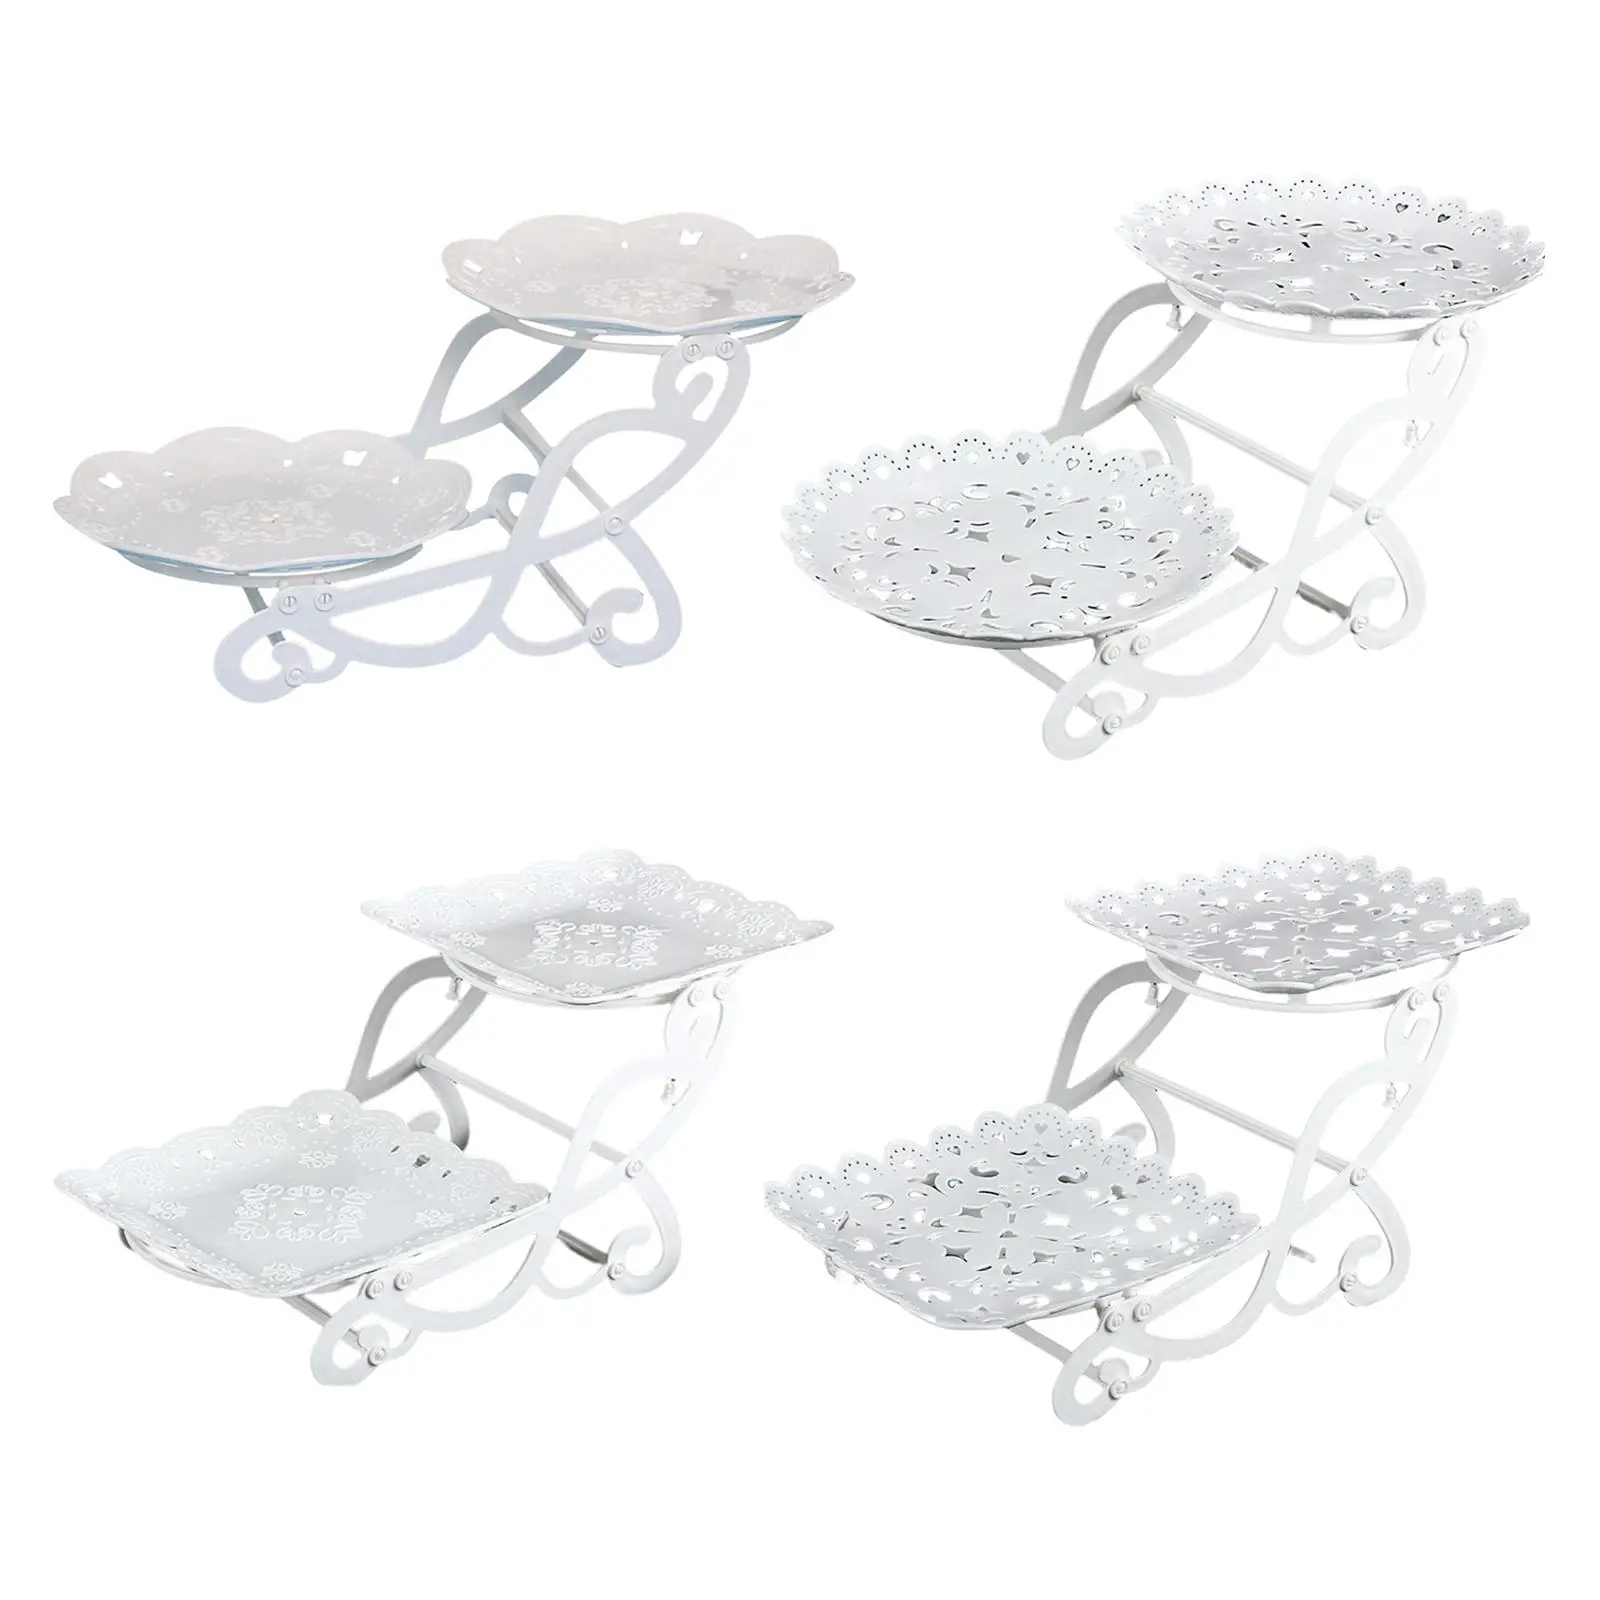 Cake Stand Dessert Serving Plate Removable for Cookies Pastry Celebration